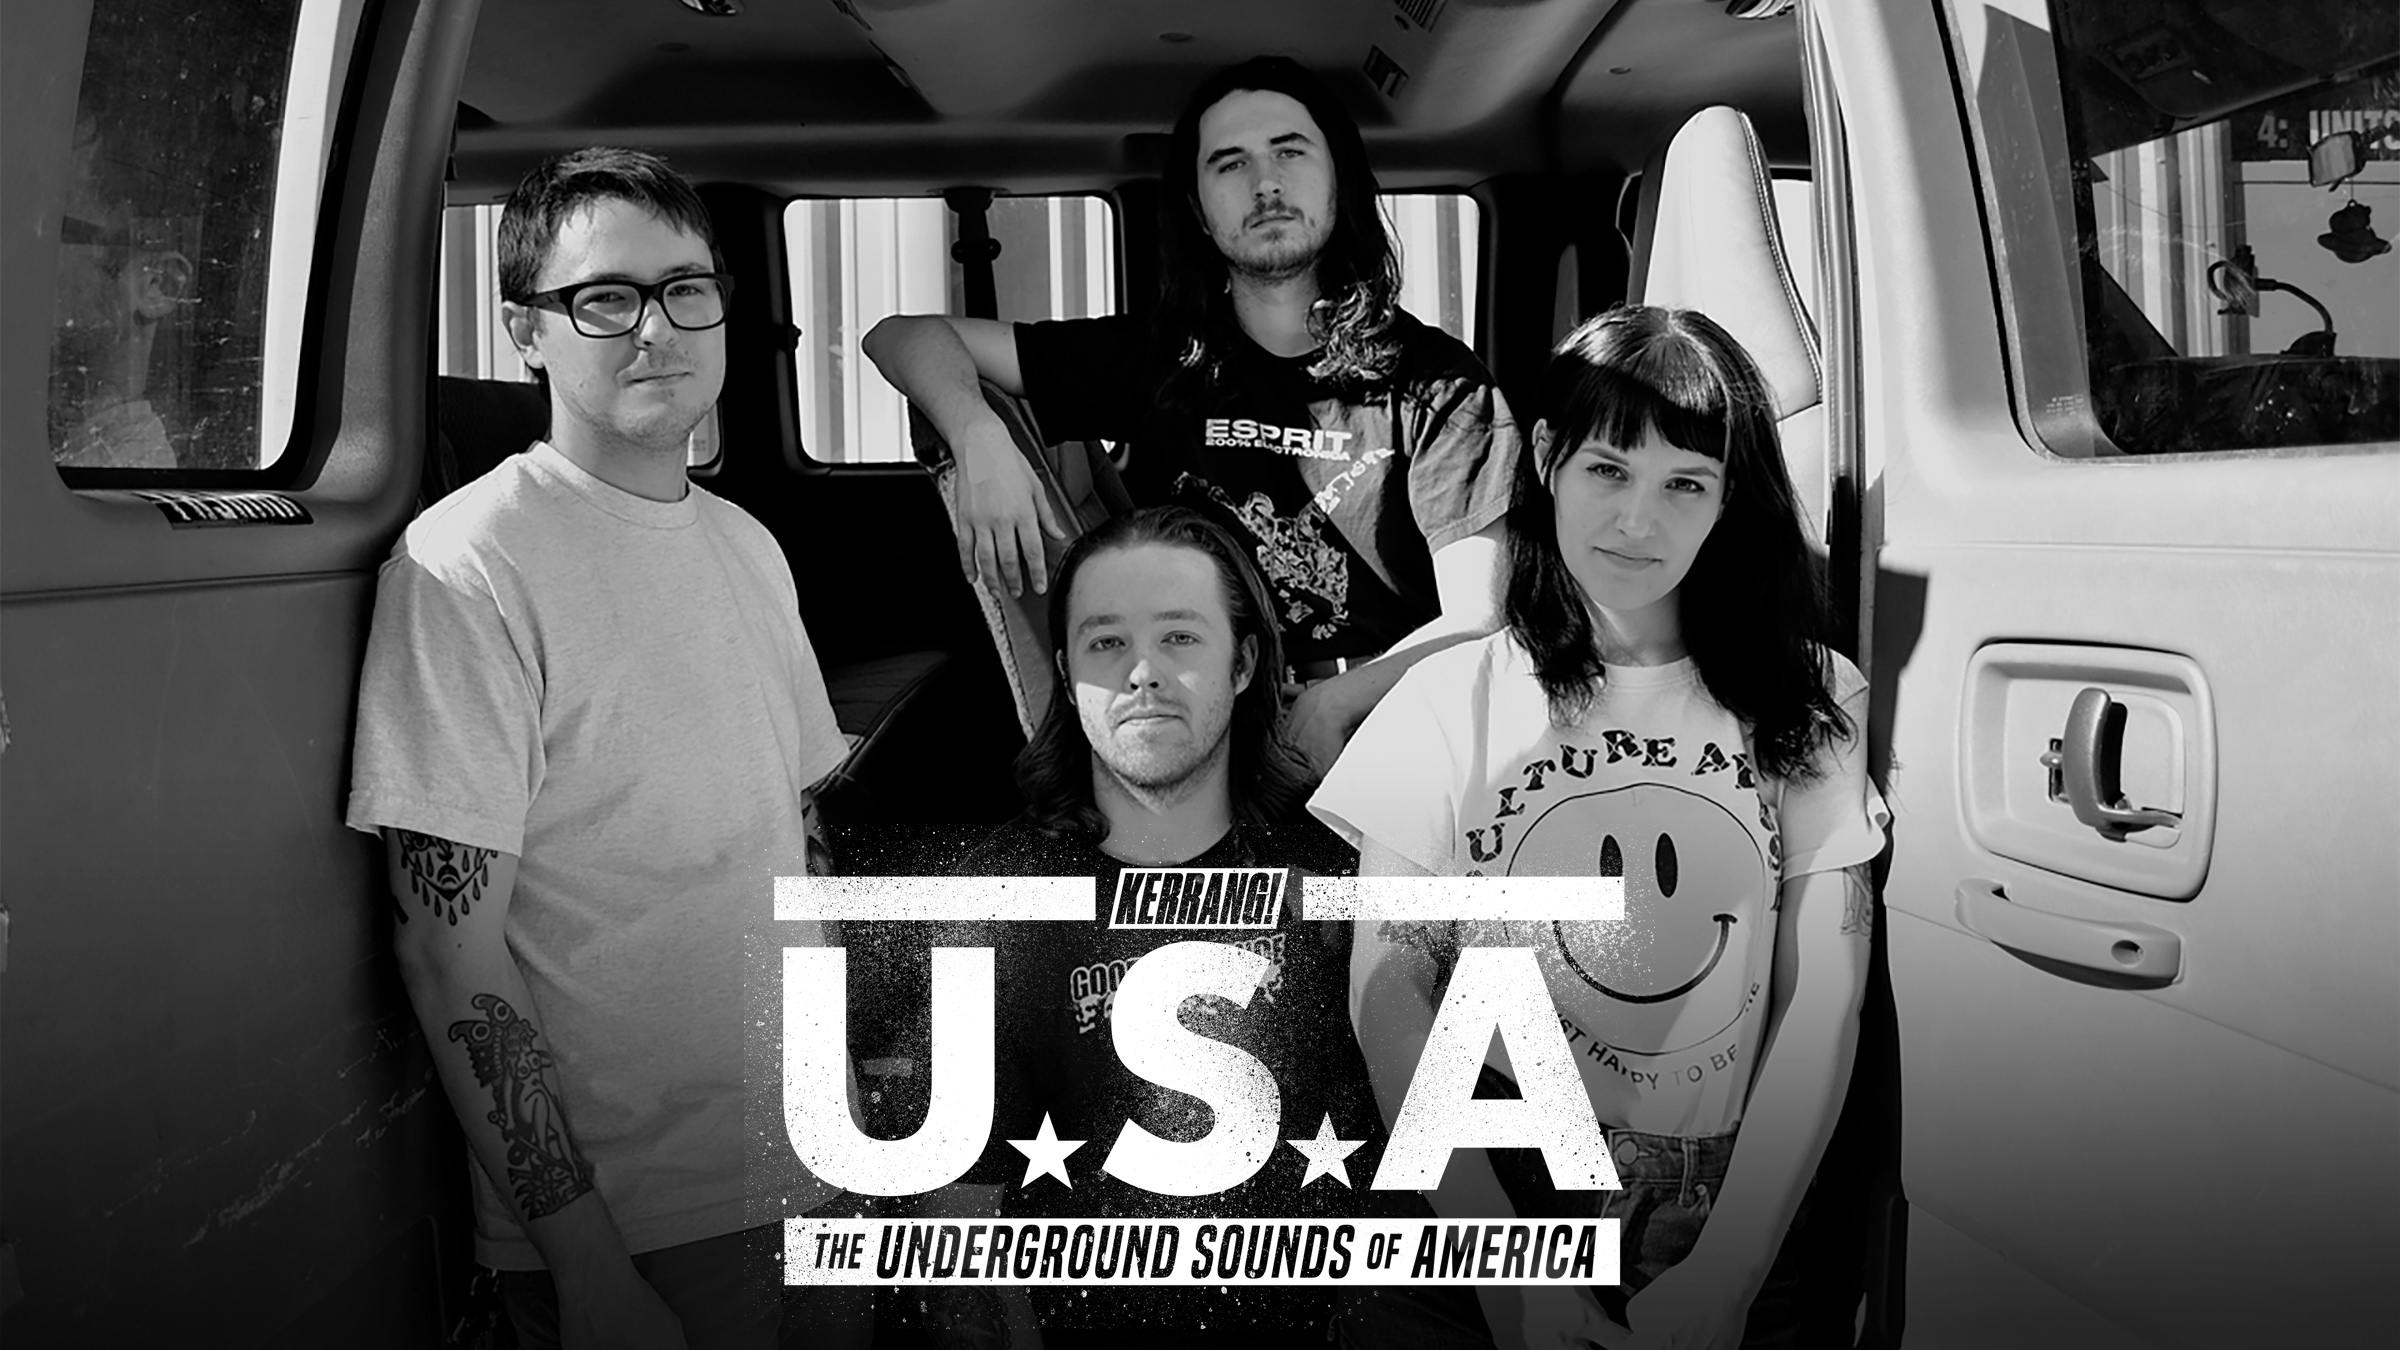 The Underground Sounds Of America: Gouge Away